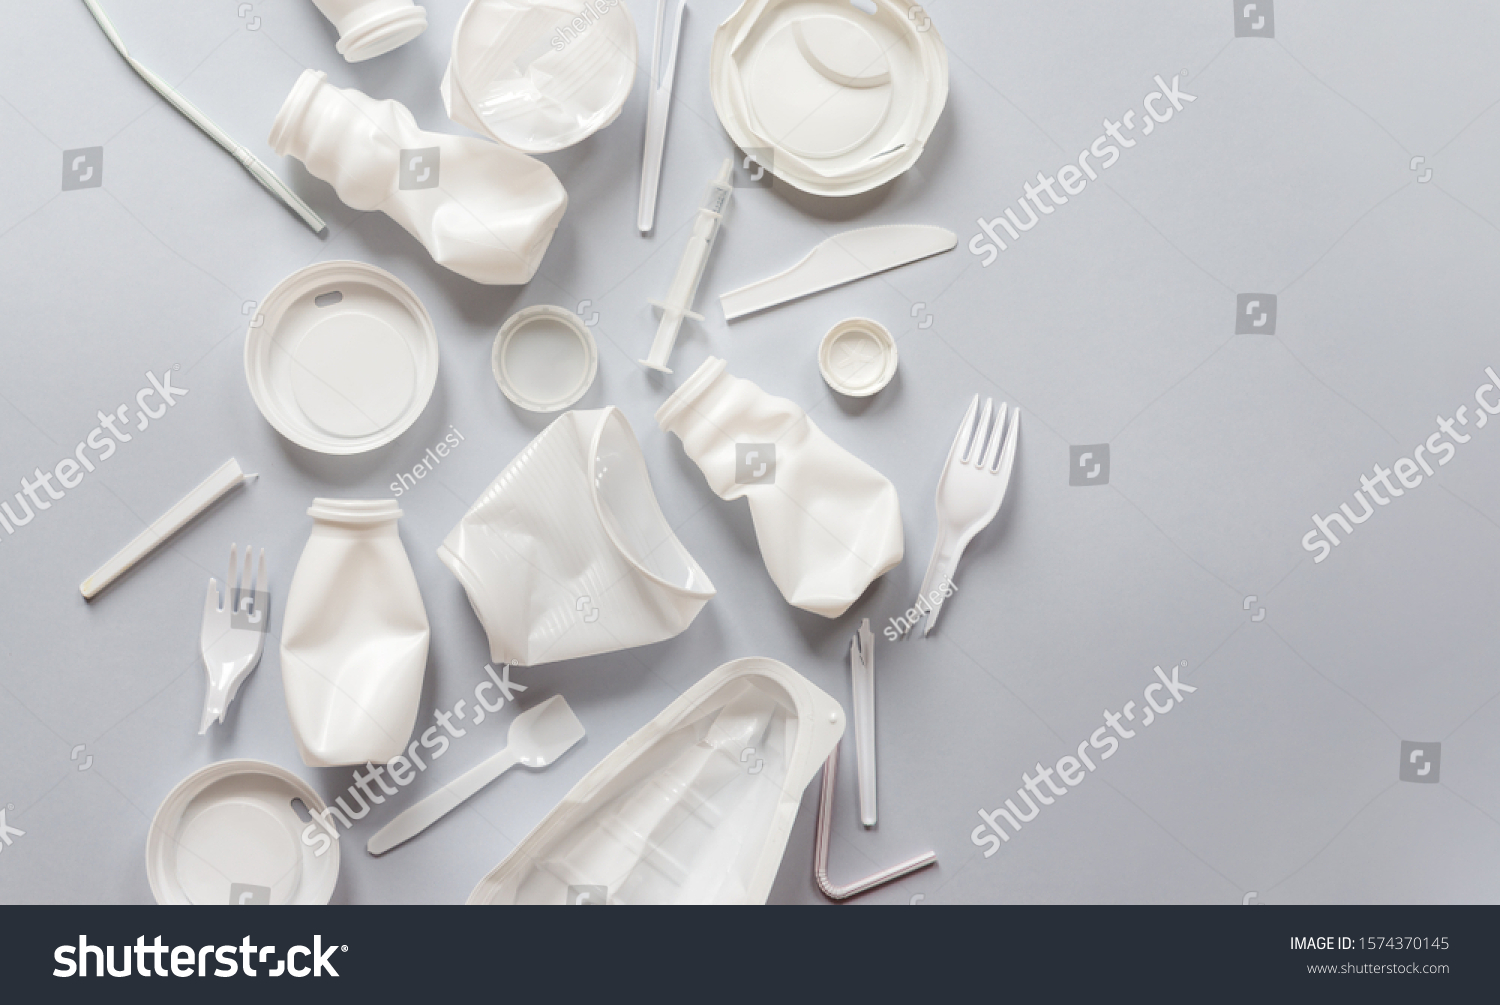 Used white plastic packaging for food on a gray background. The concept of protecting the environment from plastic waste contamination. Flat lay #1574370145